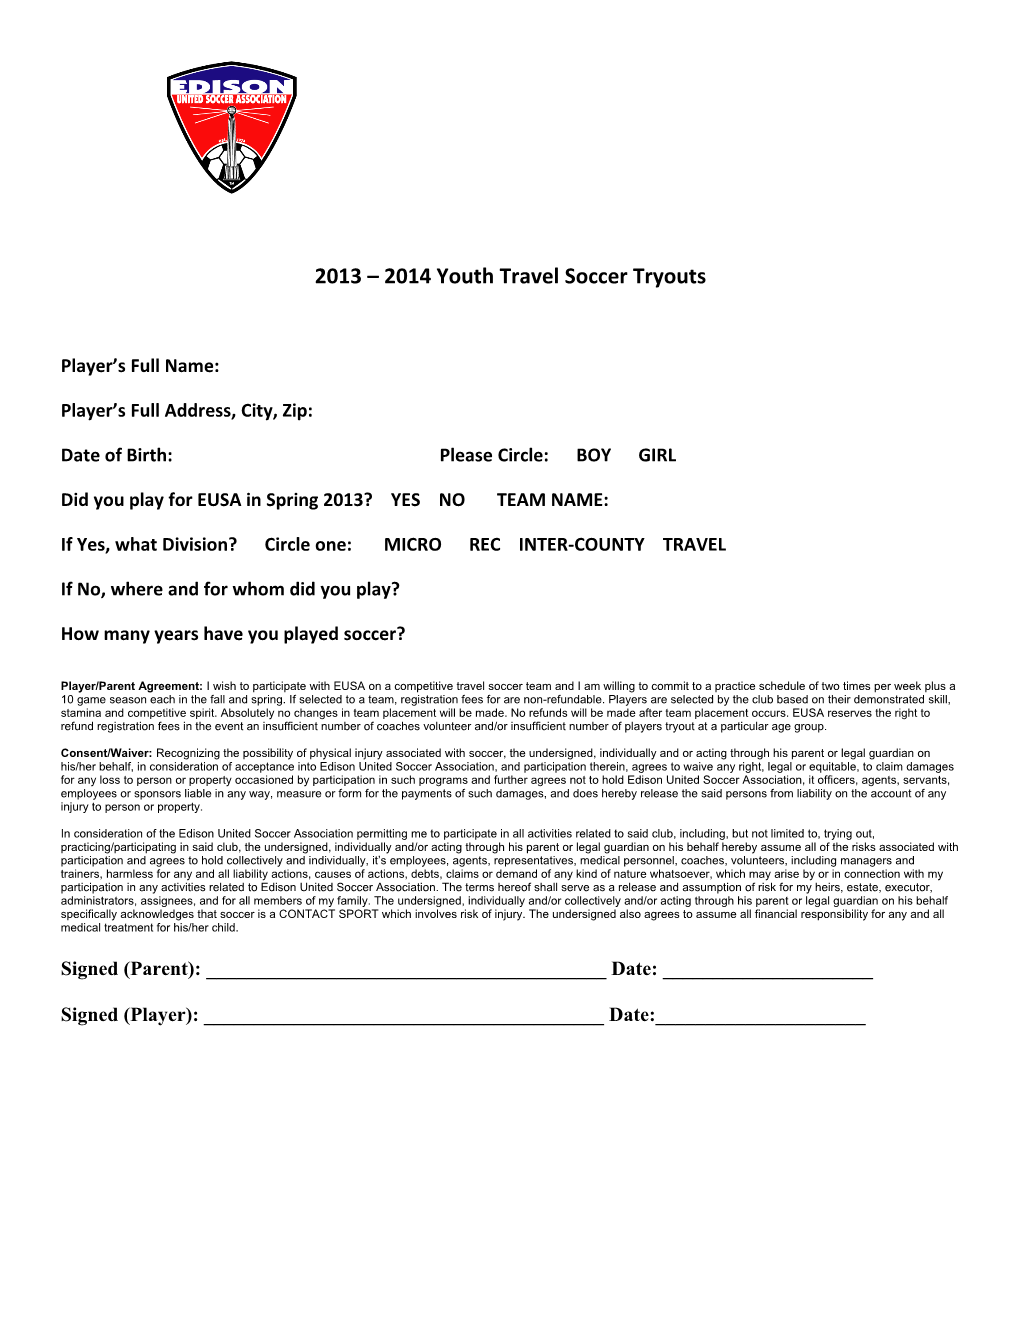 2013 2014 Youth Travel Soccer Tryouts